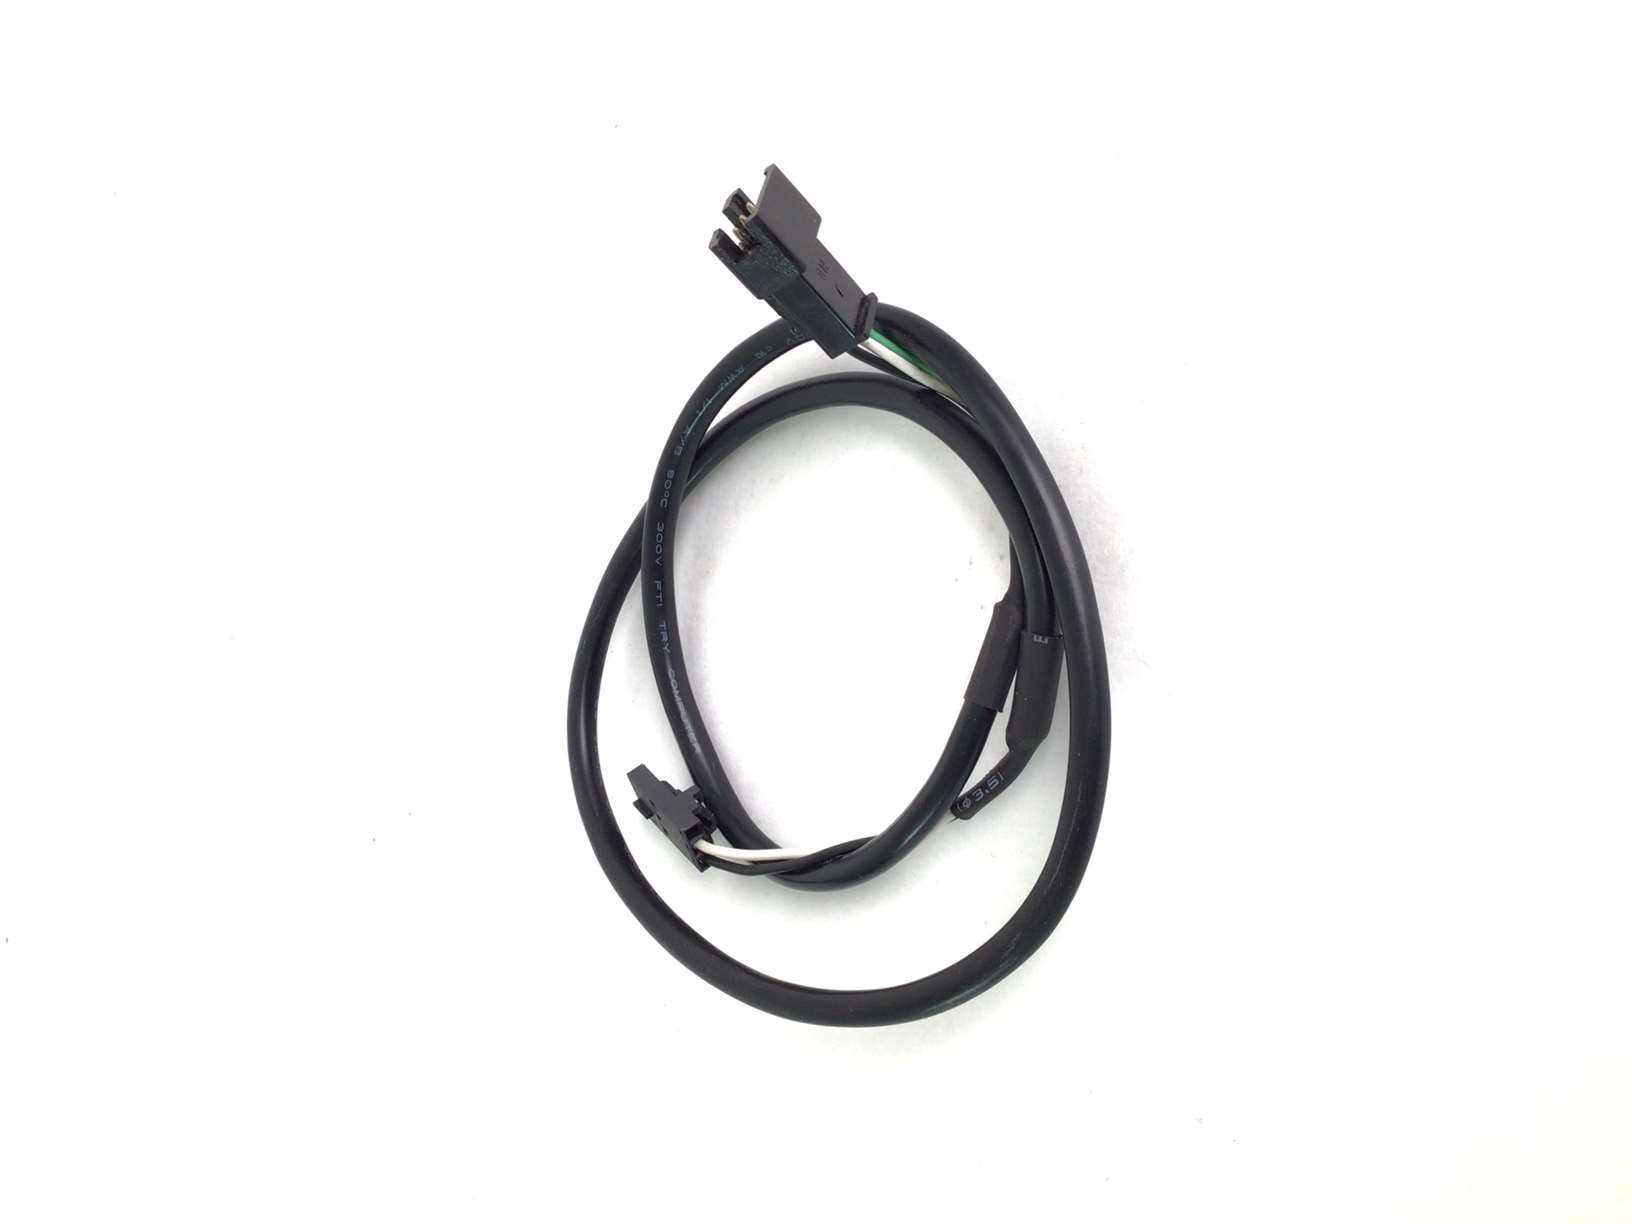 Heart Rate Sensor Cable (Used)